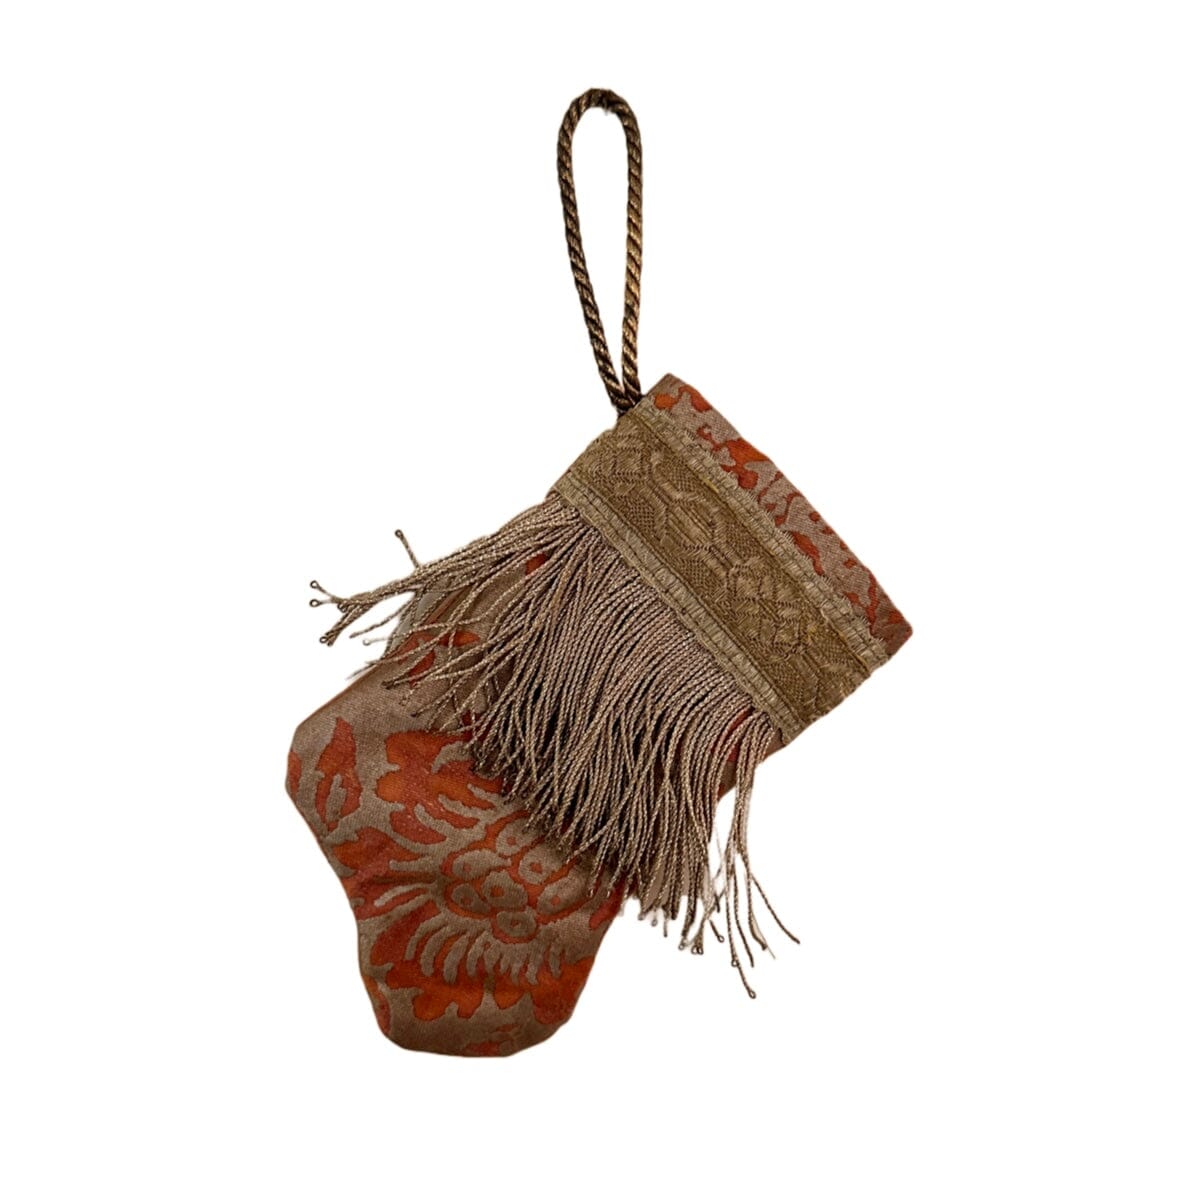 Handmade Mini Stocking made from Vintage Fortuny Fabric - Ginger / Persimmon and Silver